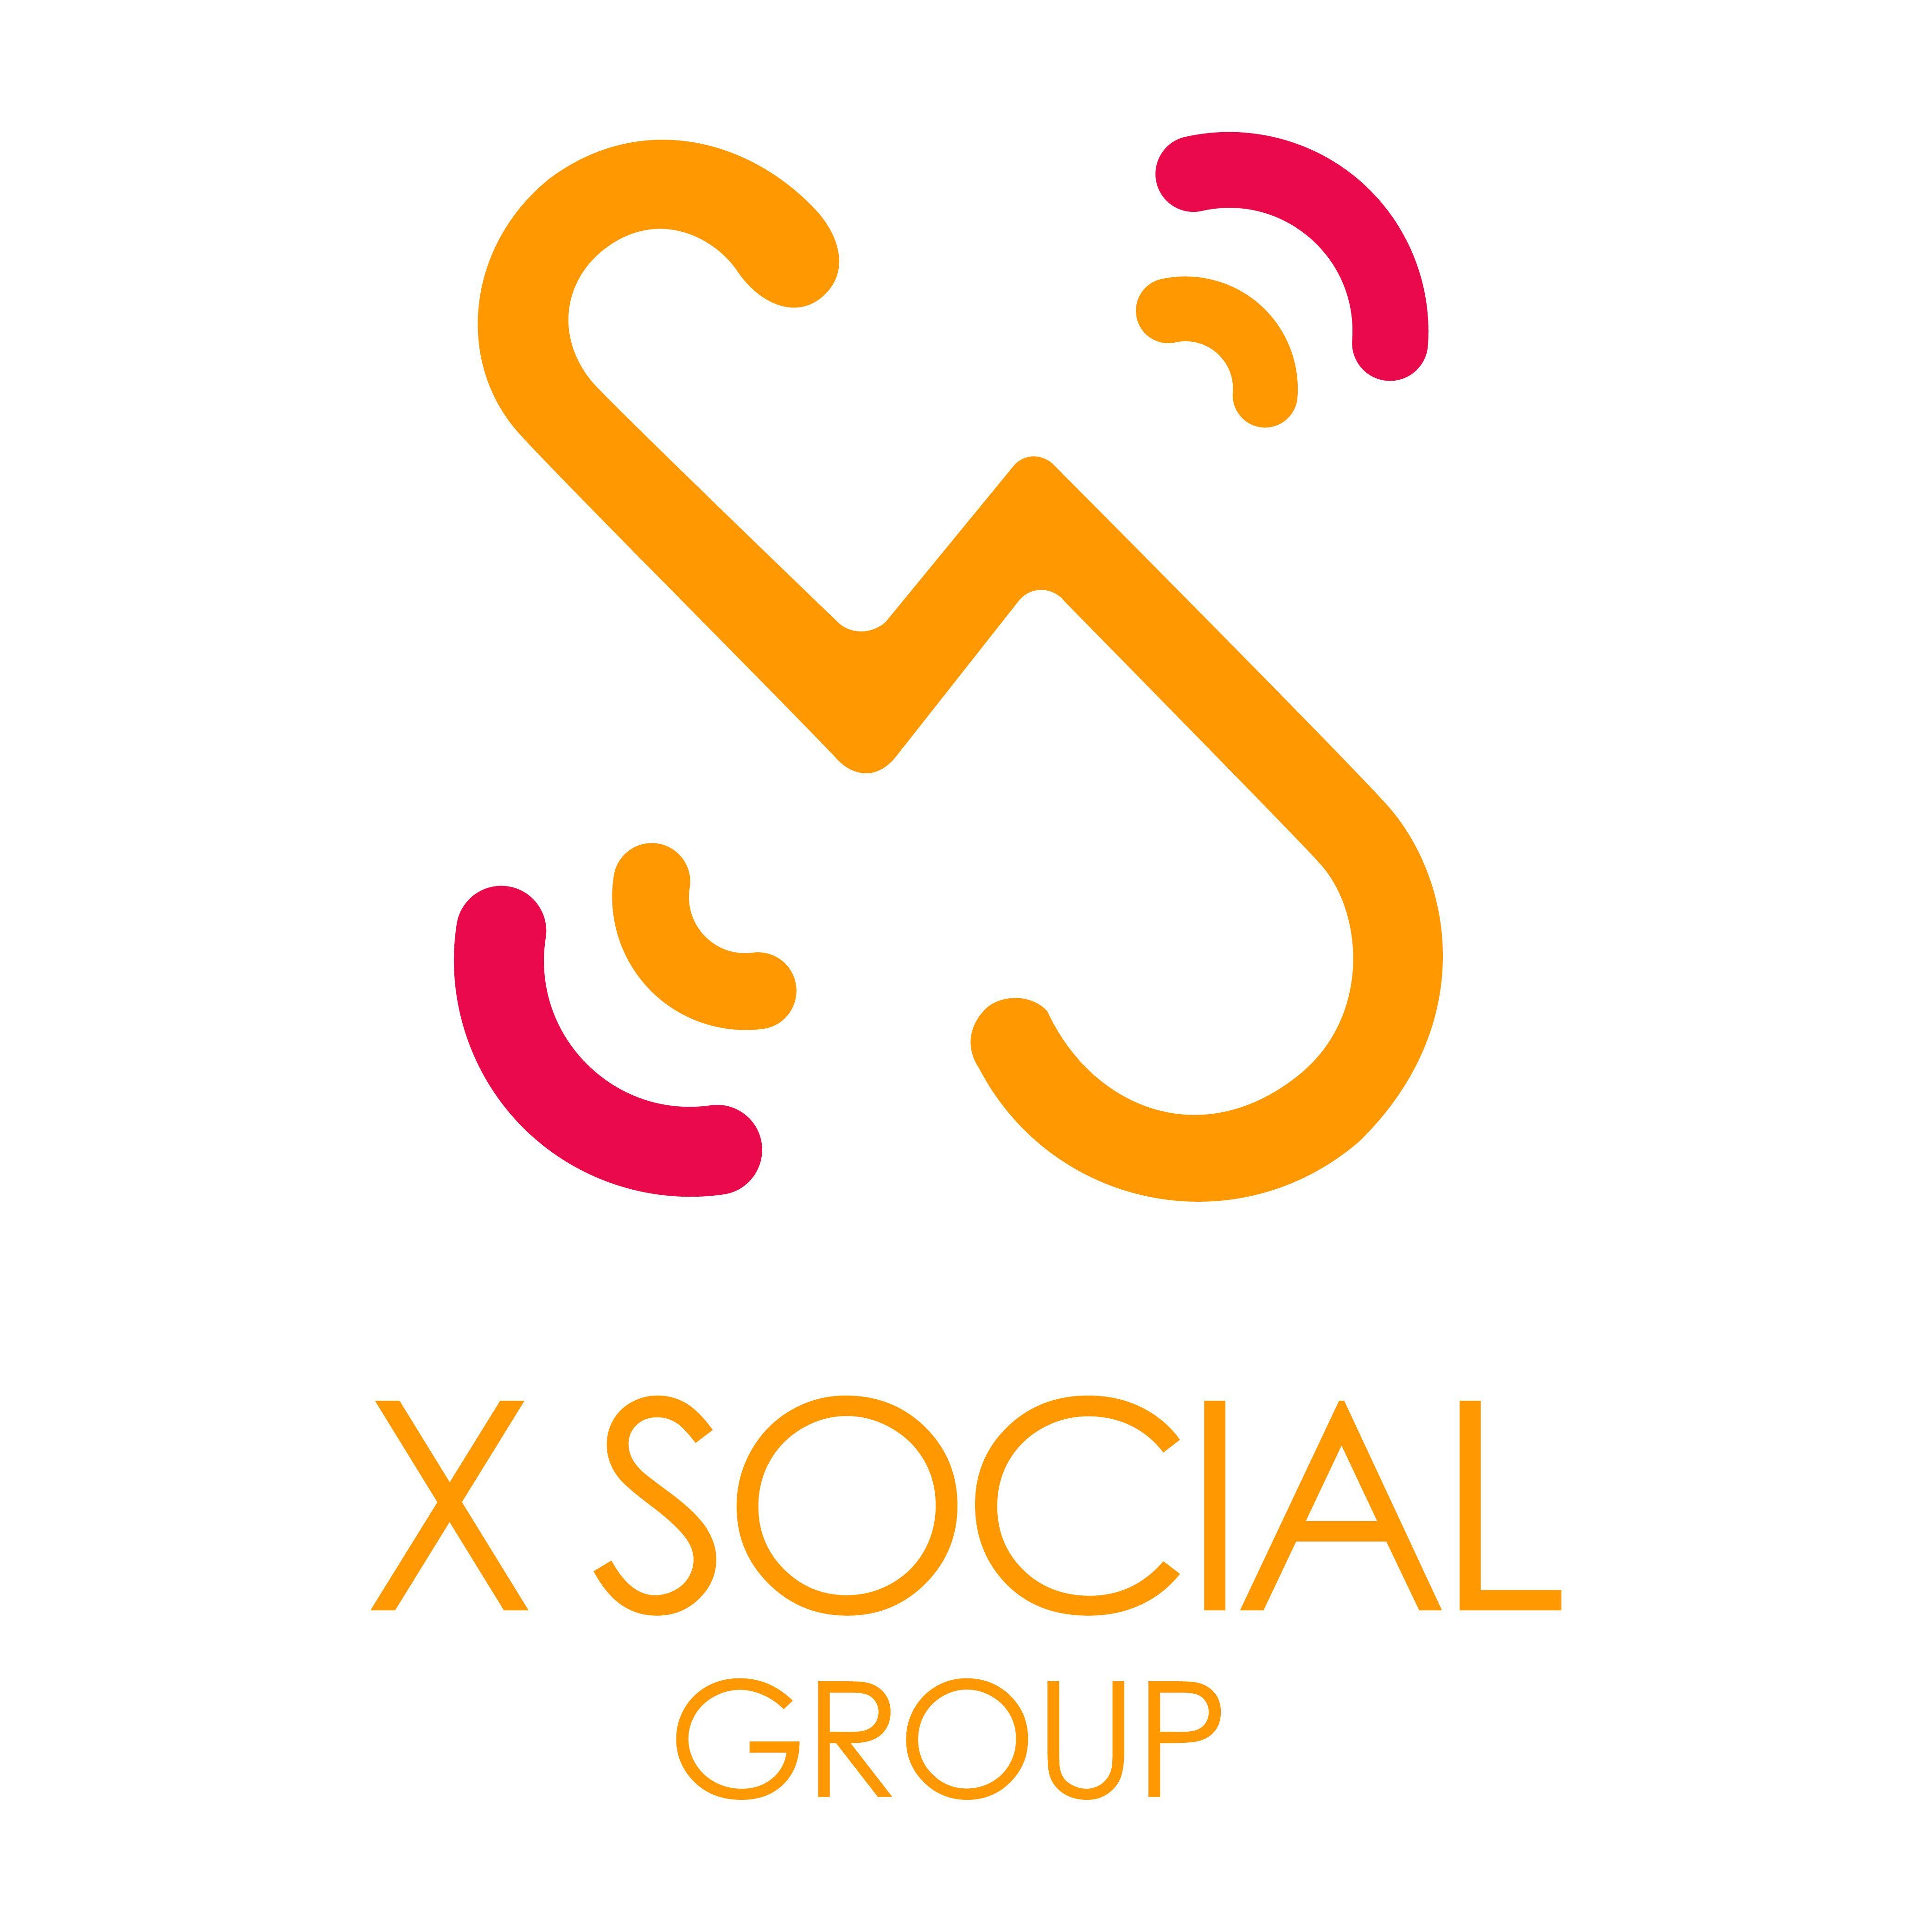 Social Group Logo - X Social Group Limited. The Association of Accredited Advertising